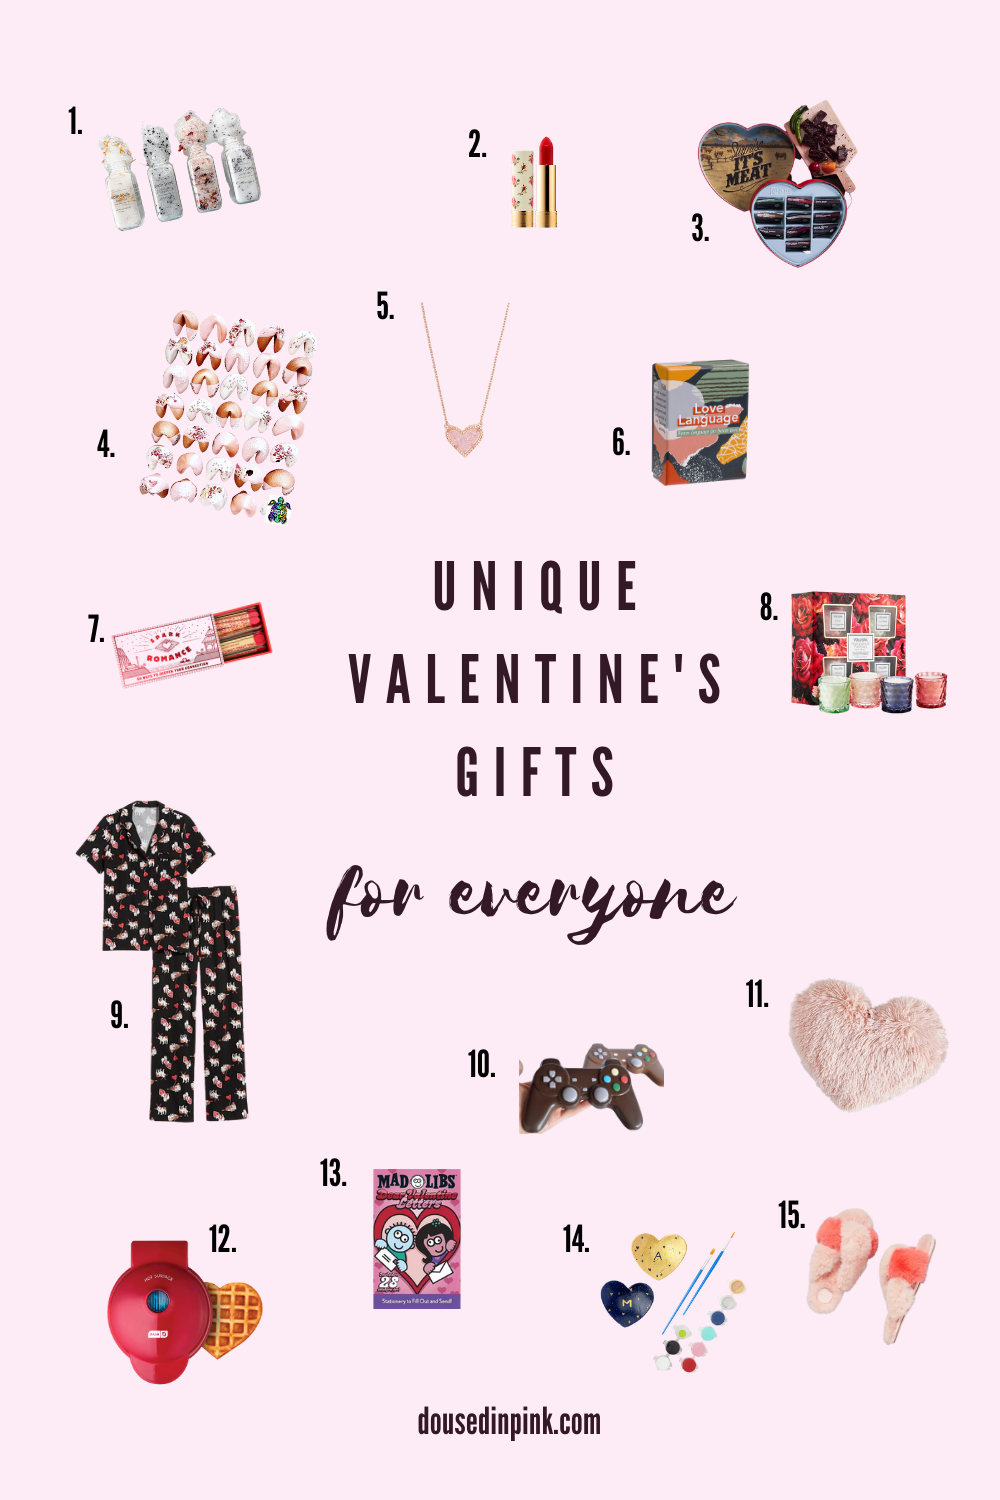 Unique Valentine's Gifts for Everyone